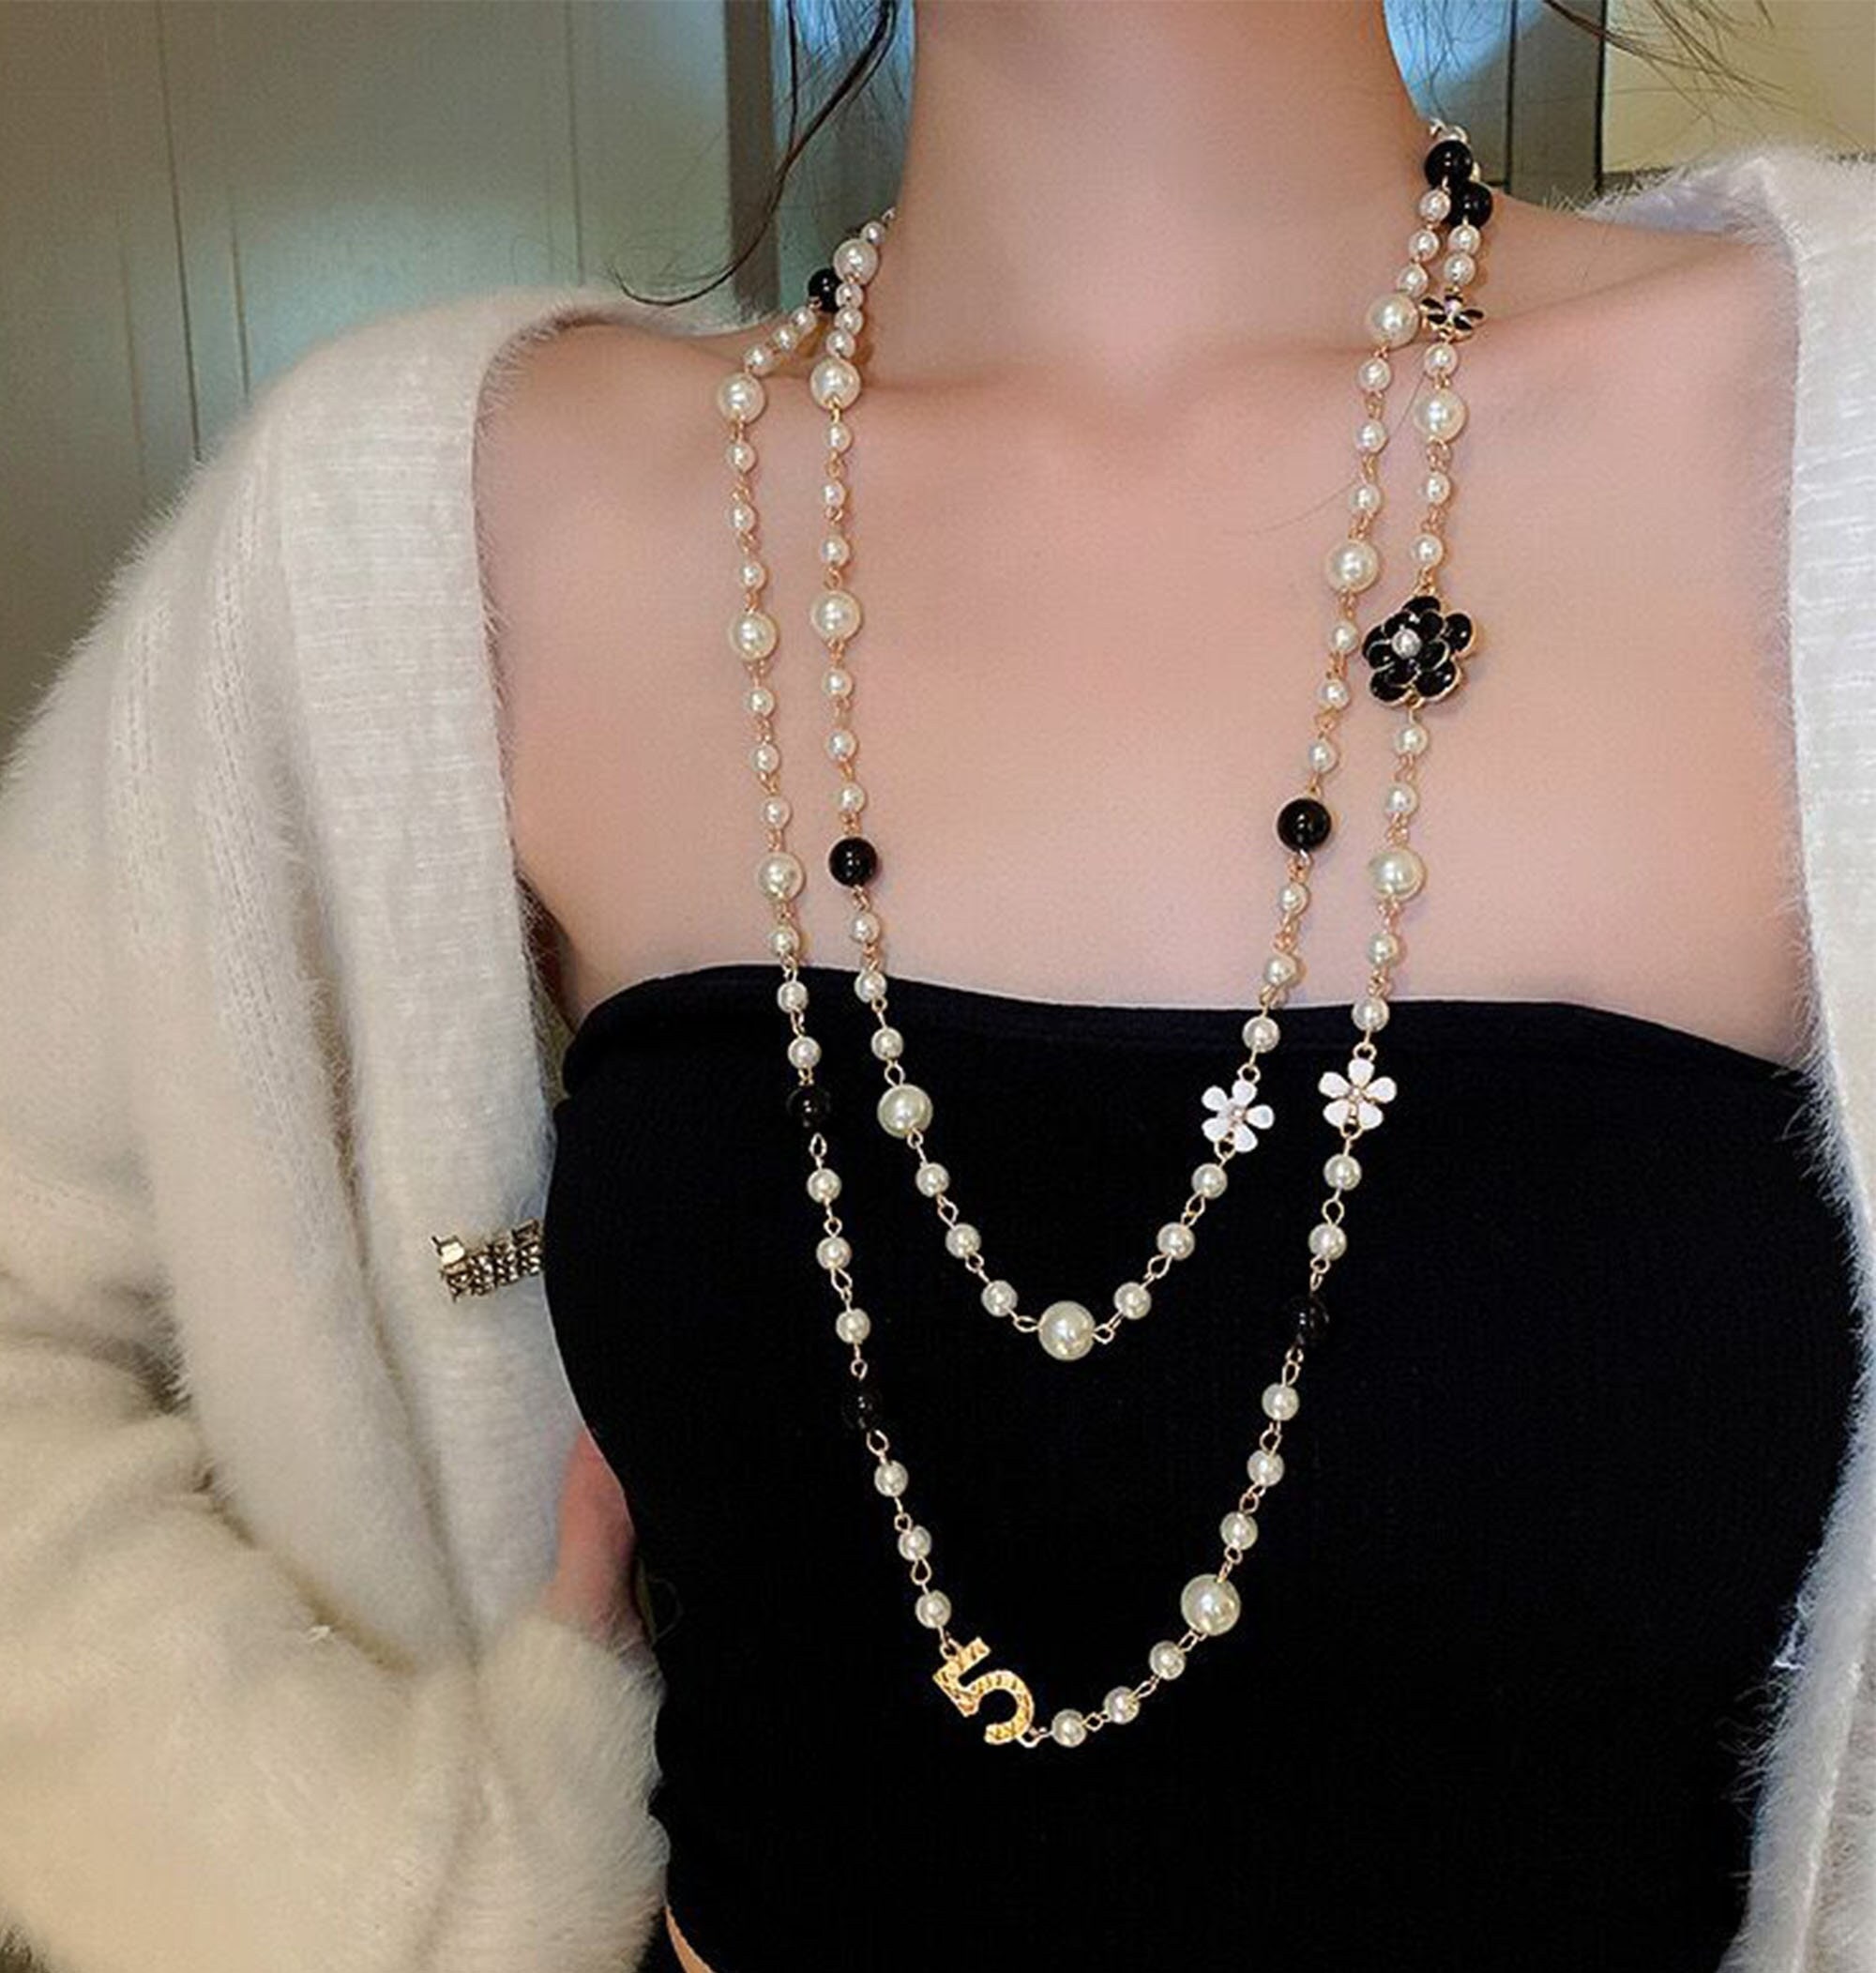 Chanel Faux Pearl Necklace